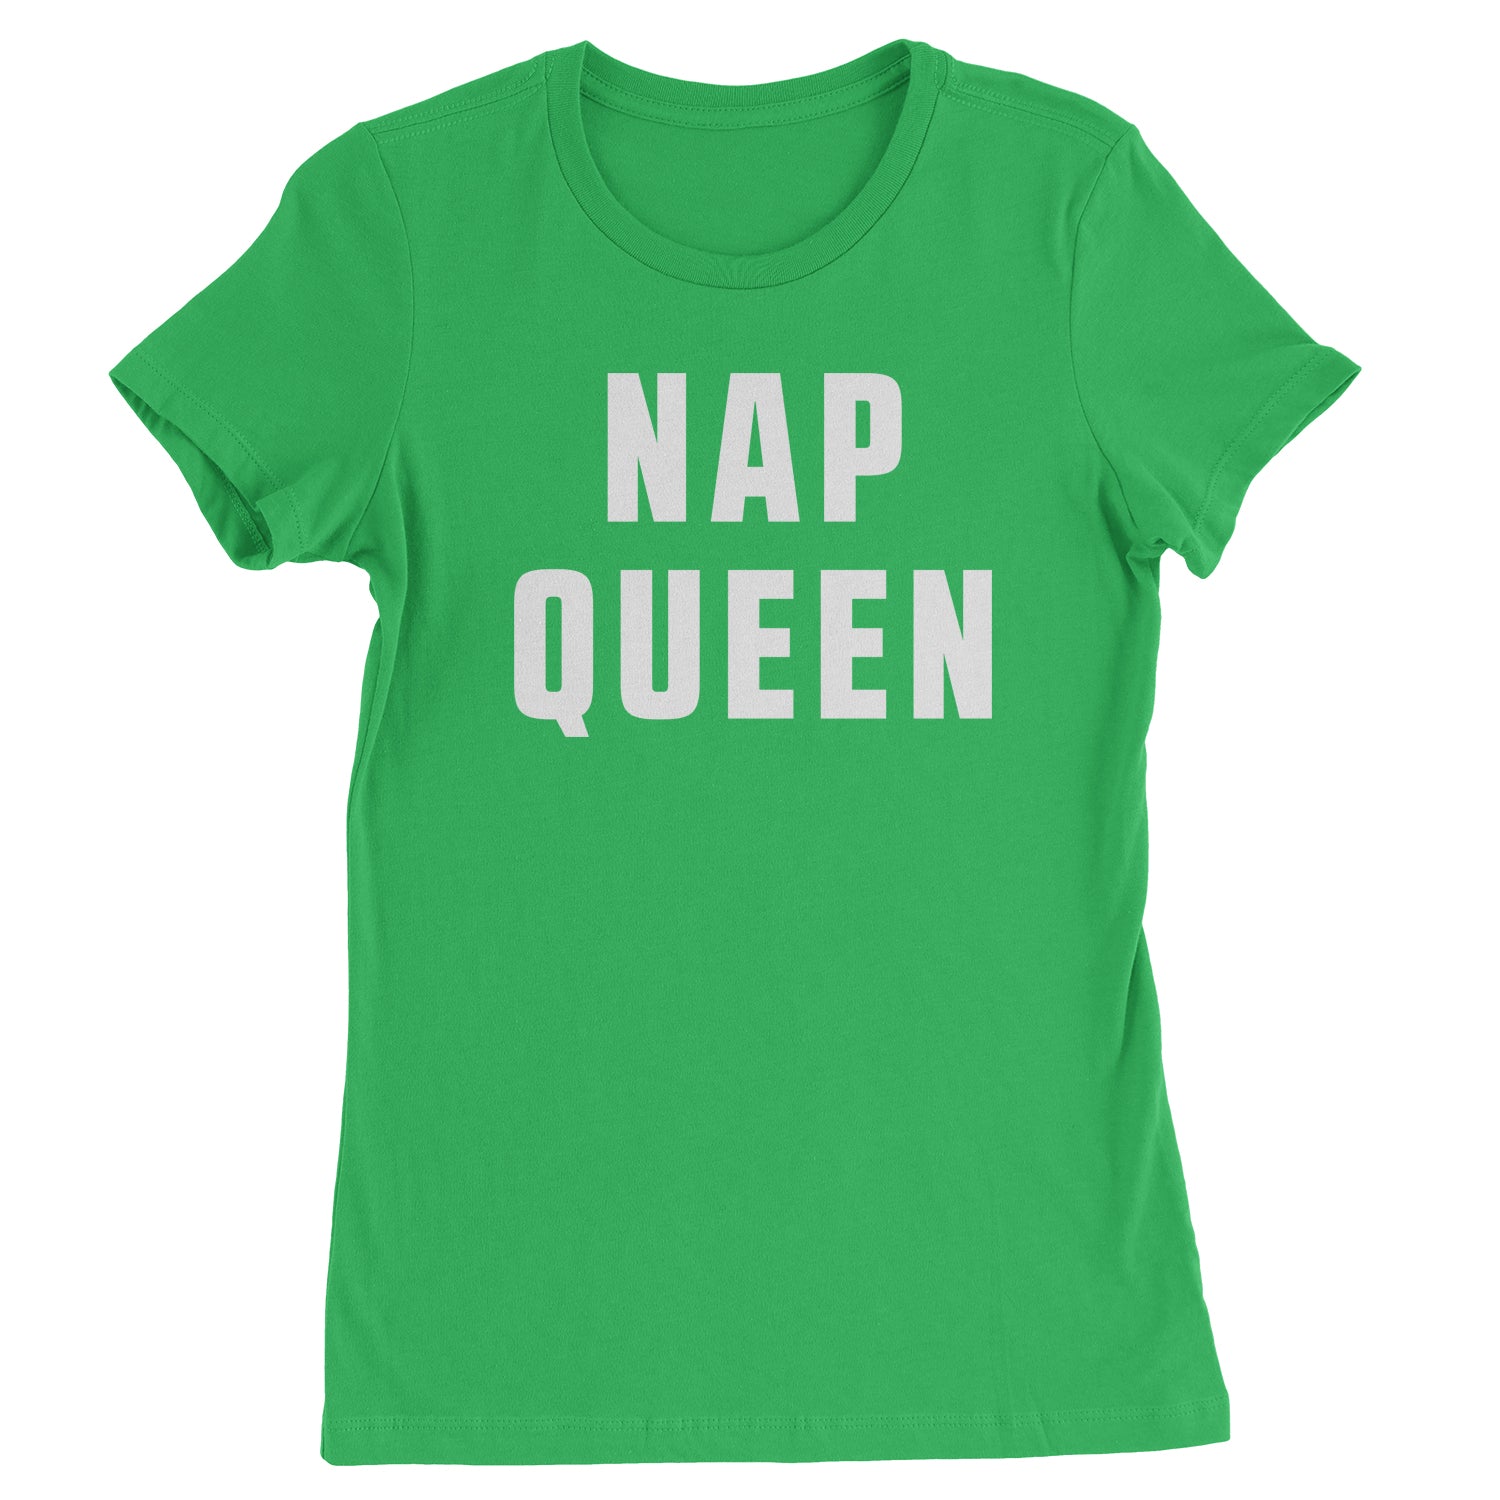 Nap Queen (White Print) Comfy Top For Lazy Days Womens T-shirt all, day, function, lazy, nap, pajamas, queen, siesta, sleep, tired, to, too by Expression Tees